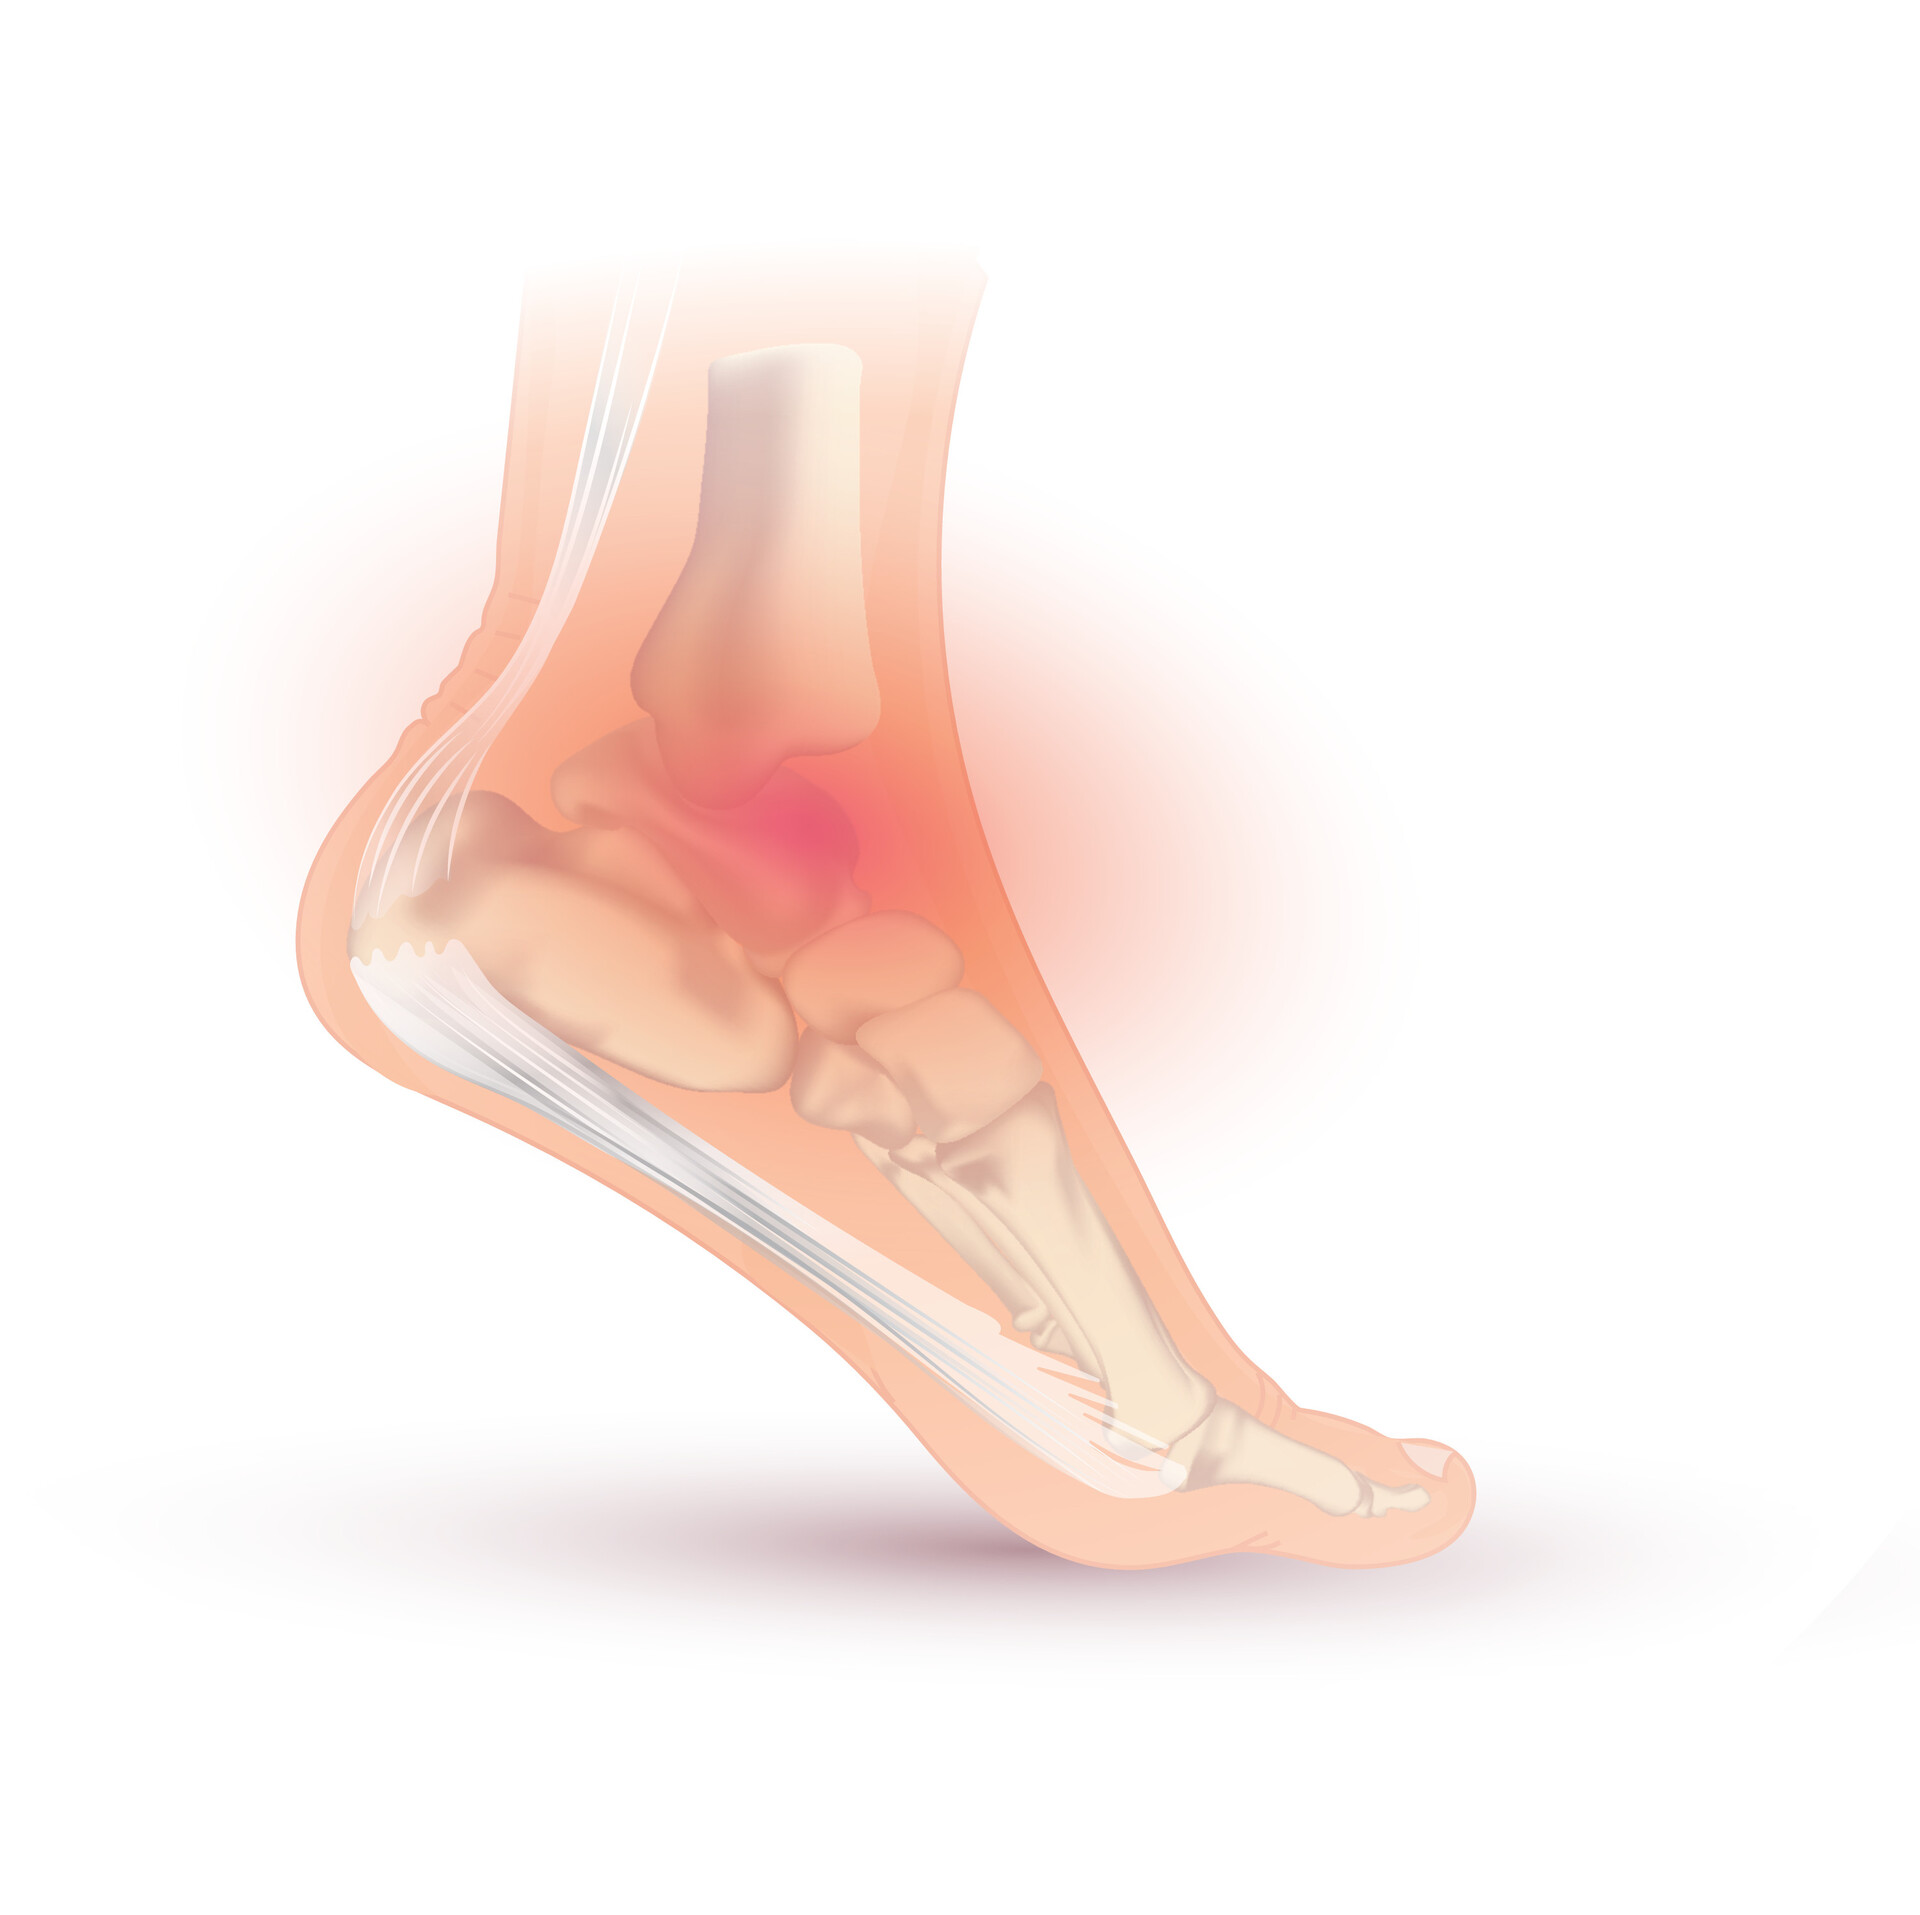 Ankle Injuries and Disorders - StoryMD